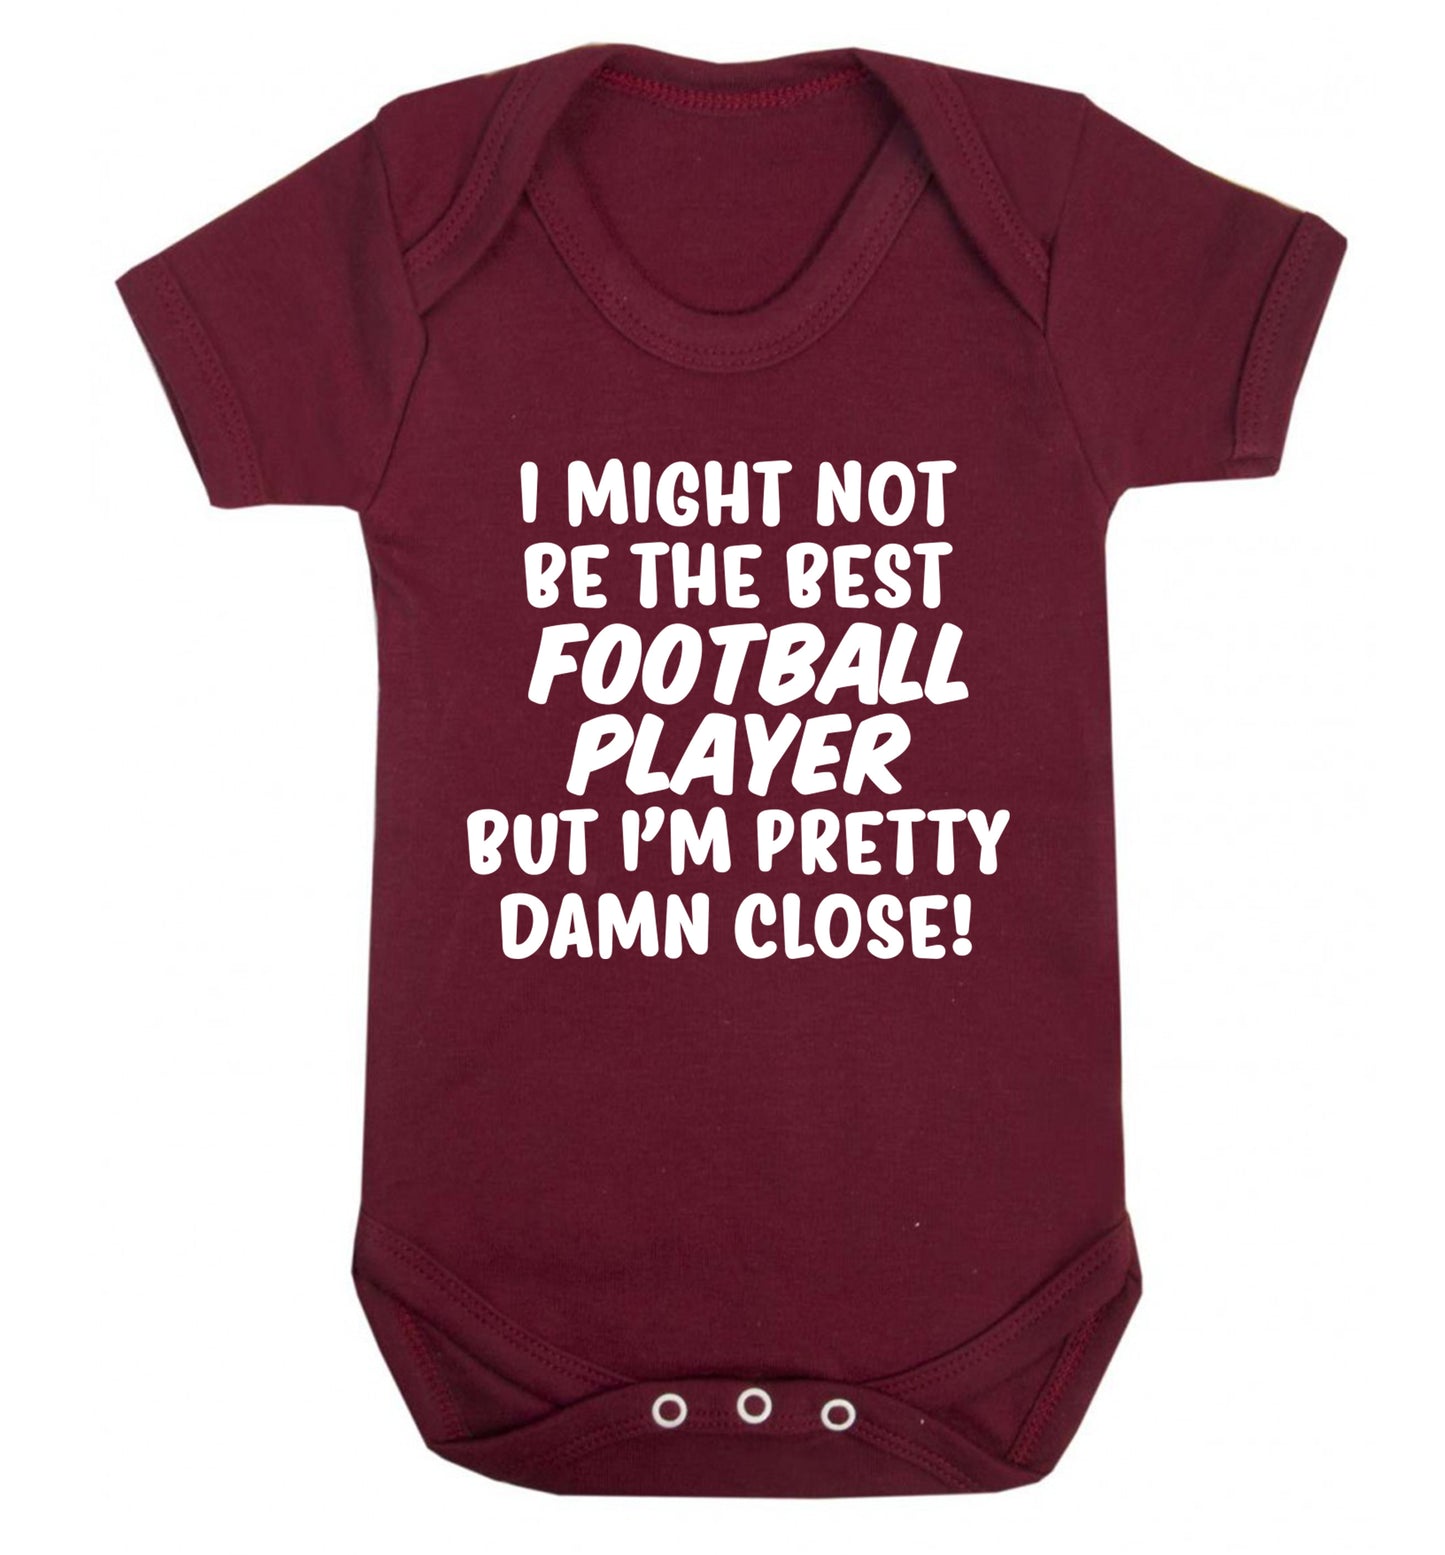 I might not be the best football player but I'm pretty close! Baby Vest maroon 18-24 months